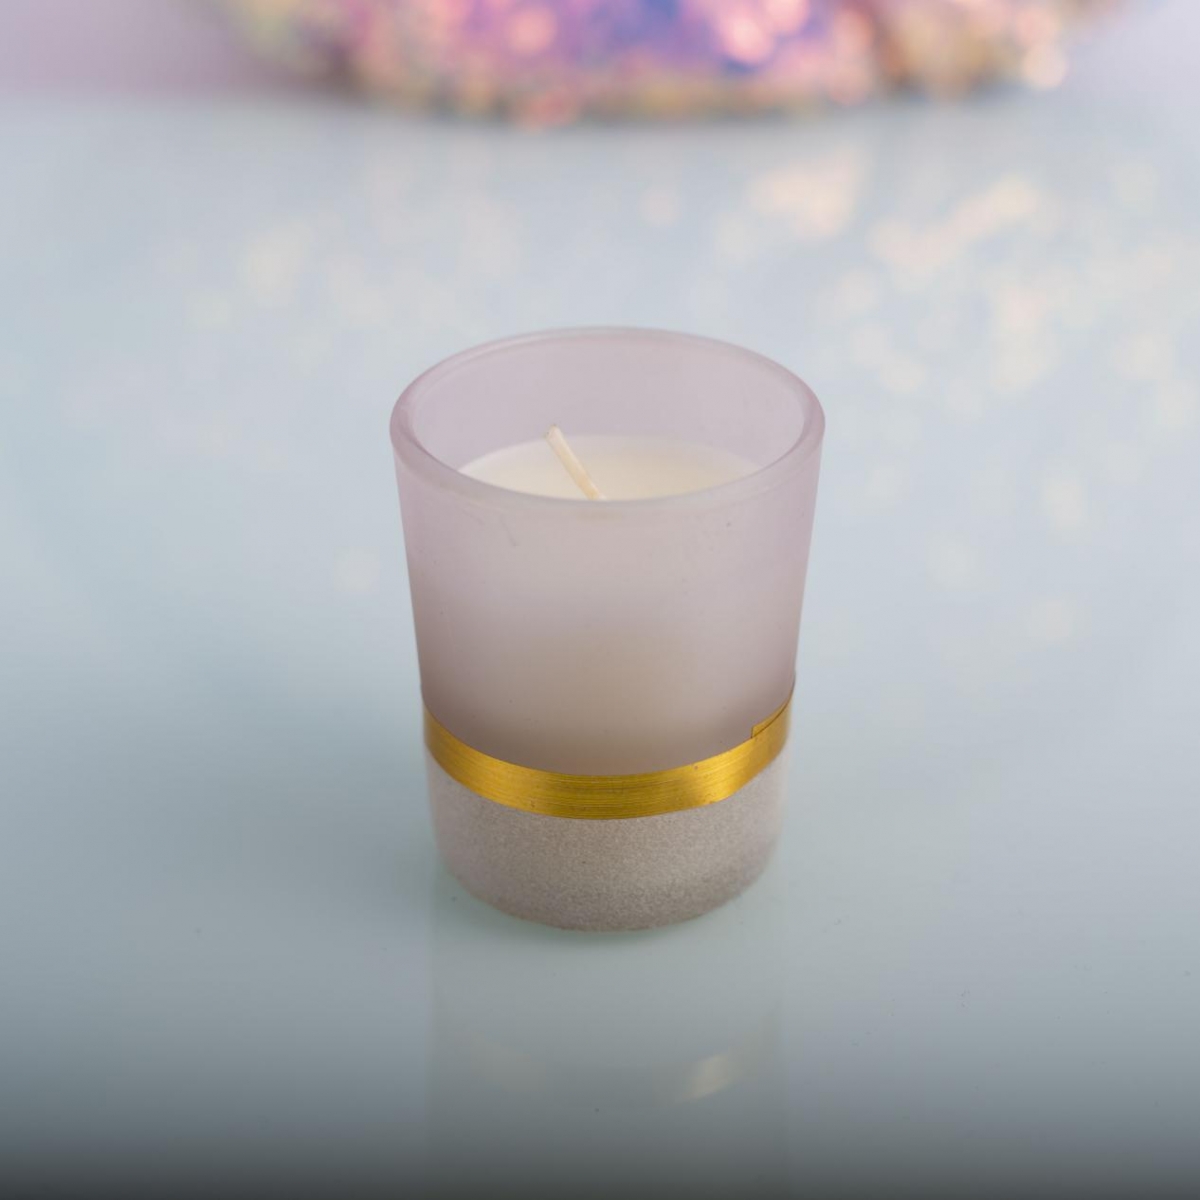 Vegan Candles : Soy Wax Blend Essential Oils , Flocking Glass Jar, China Factory, Good Price-HOWCANDLE-Candles,Scented Candles,Aromatherapy Candles,Soy Candles,Vegan Candles,Jar Candles,Pillar Candles,Candle Gift Sets,Essential Oils,Reed Diffuser,Candle Holder,